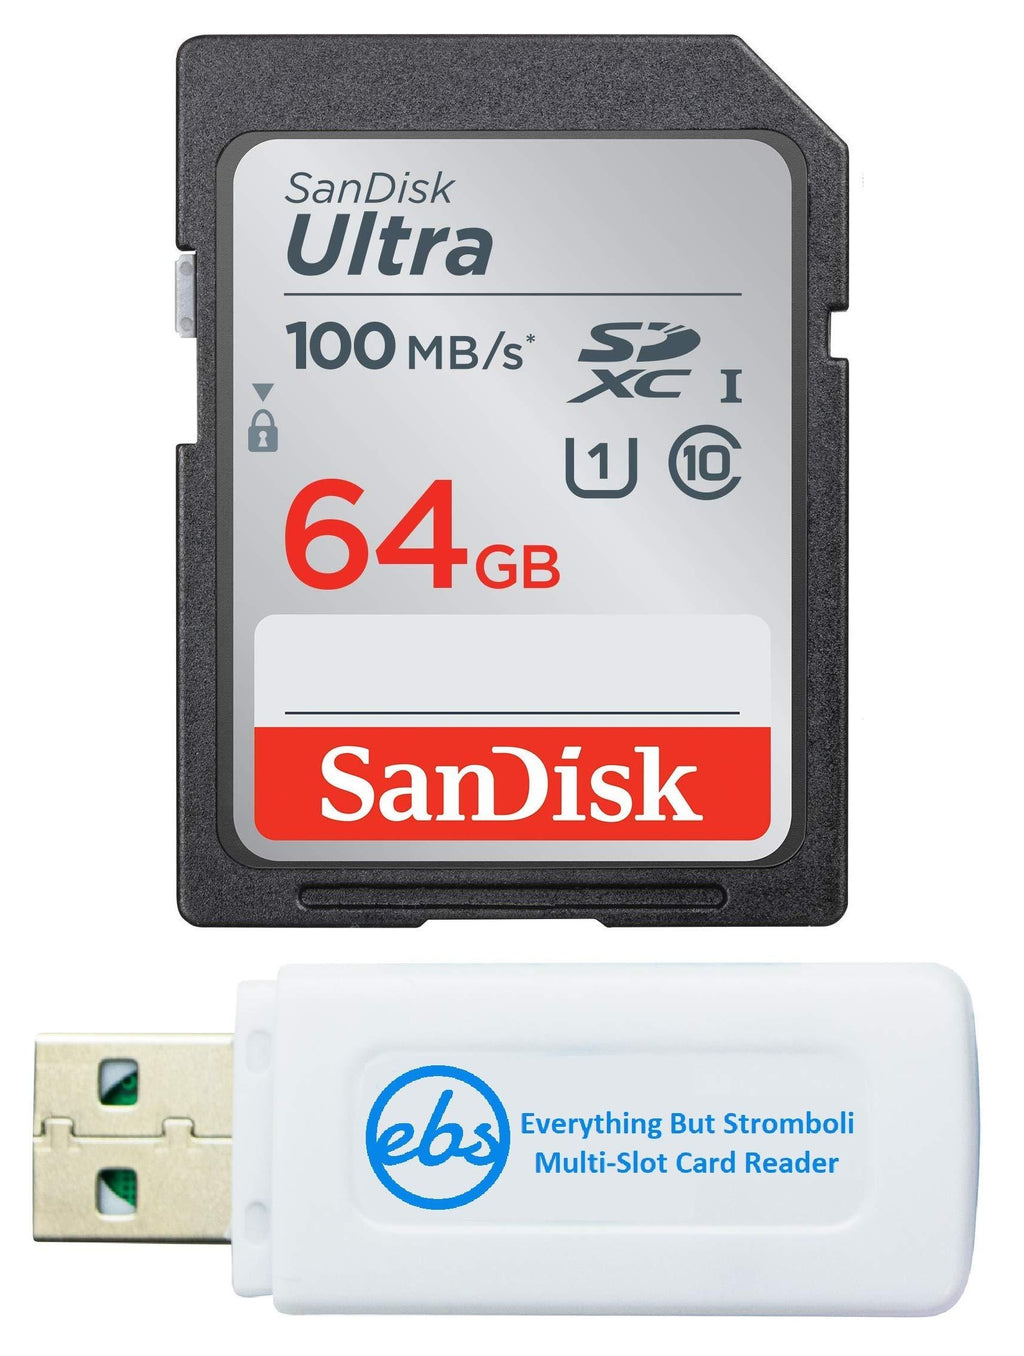 SanDisk 64GB SDXC SD Ultra Memory Card Works with Nikon Coolpix A900, A100, P1000, W100, W300, B700 Digital Camera (SDSDUNR-064G-GN6IN) Bundle with (1) Everything But Stromboli Card Reader - LeoForward Australia